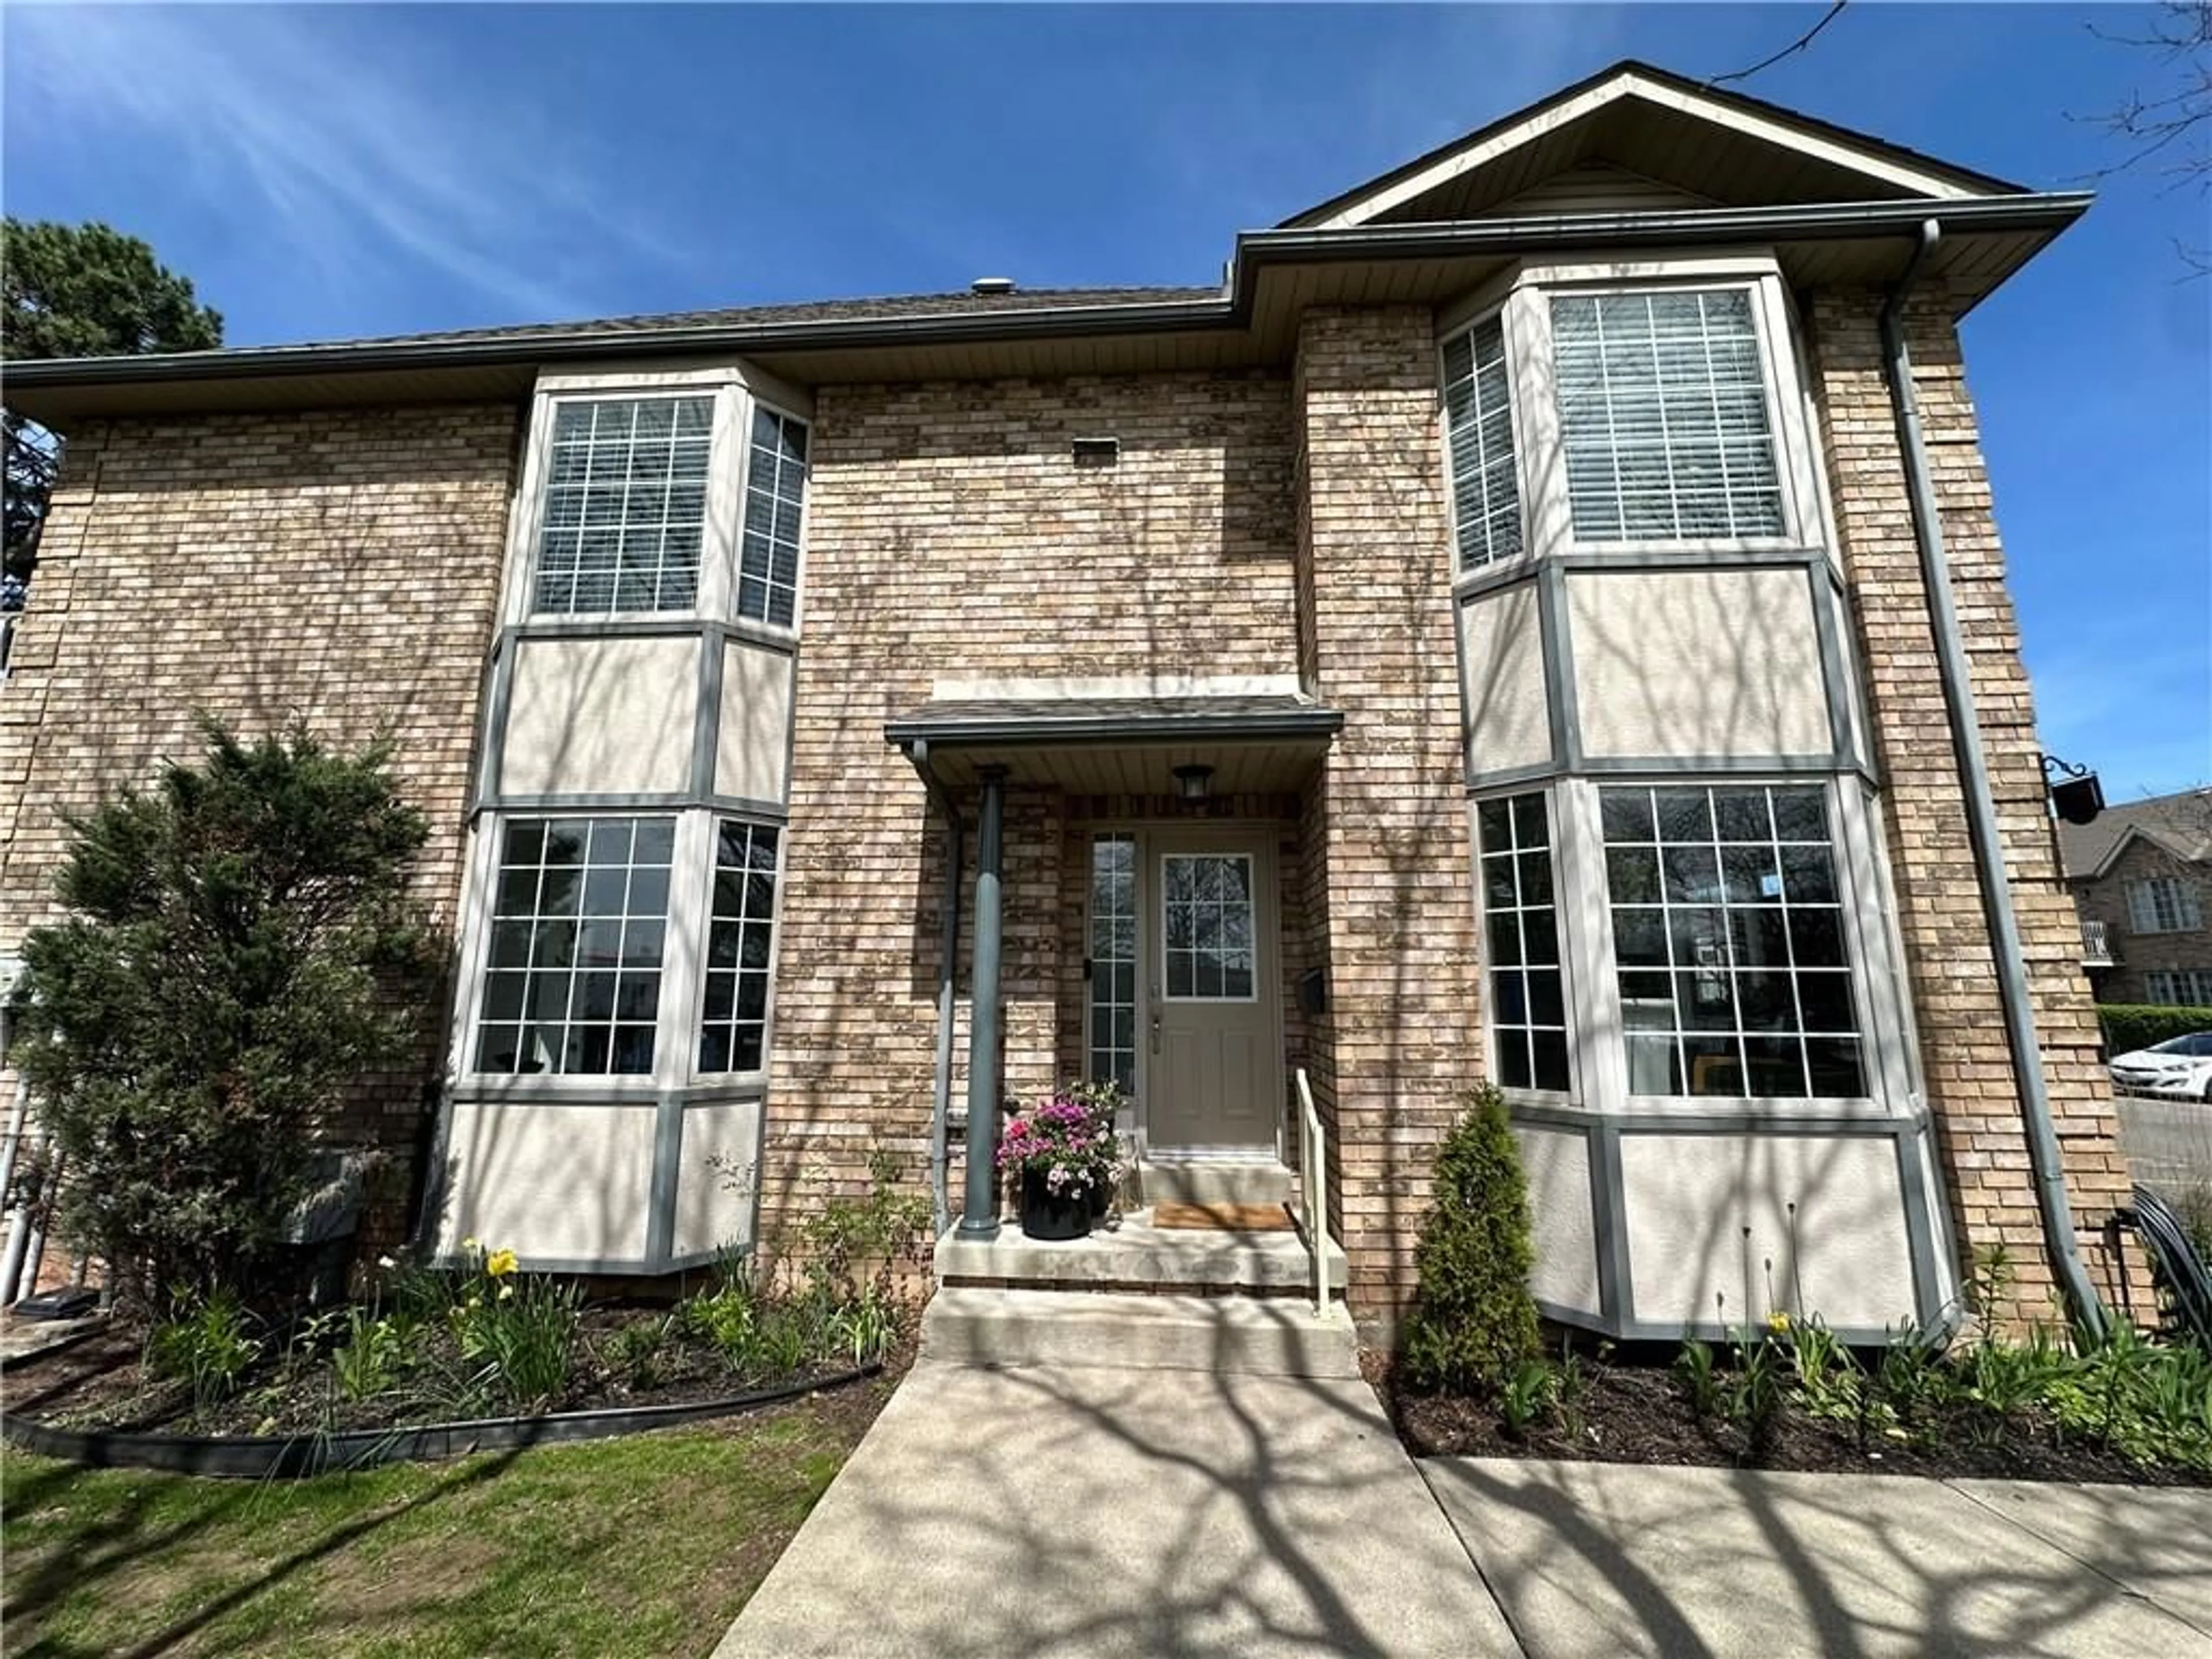 Home with brick exterior material for 705 Cumberland Ave #29, Burlington Ontario L7N 3W4